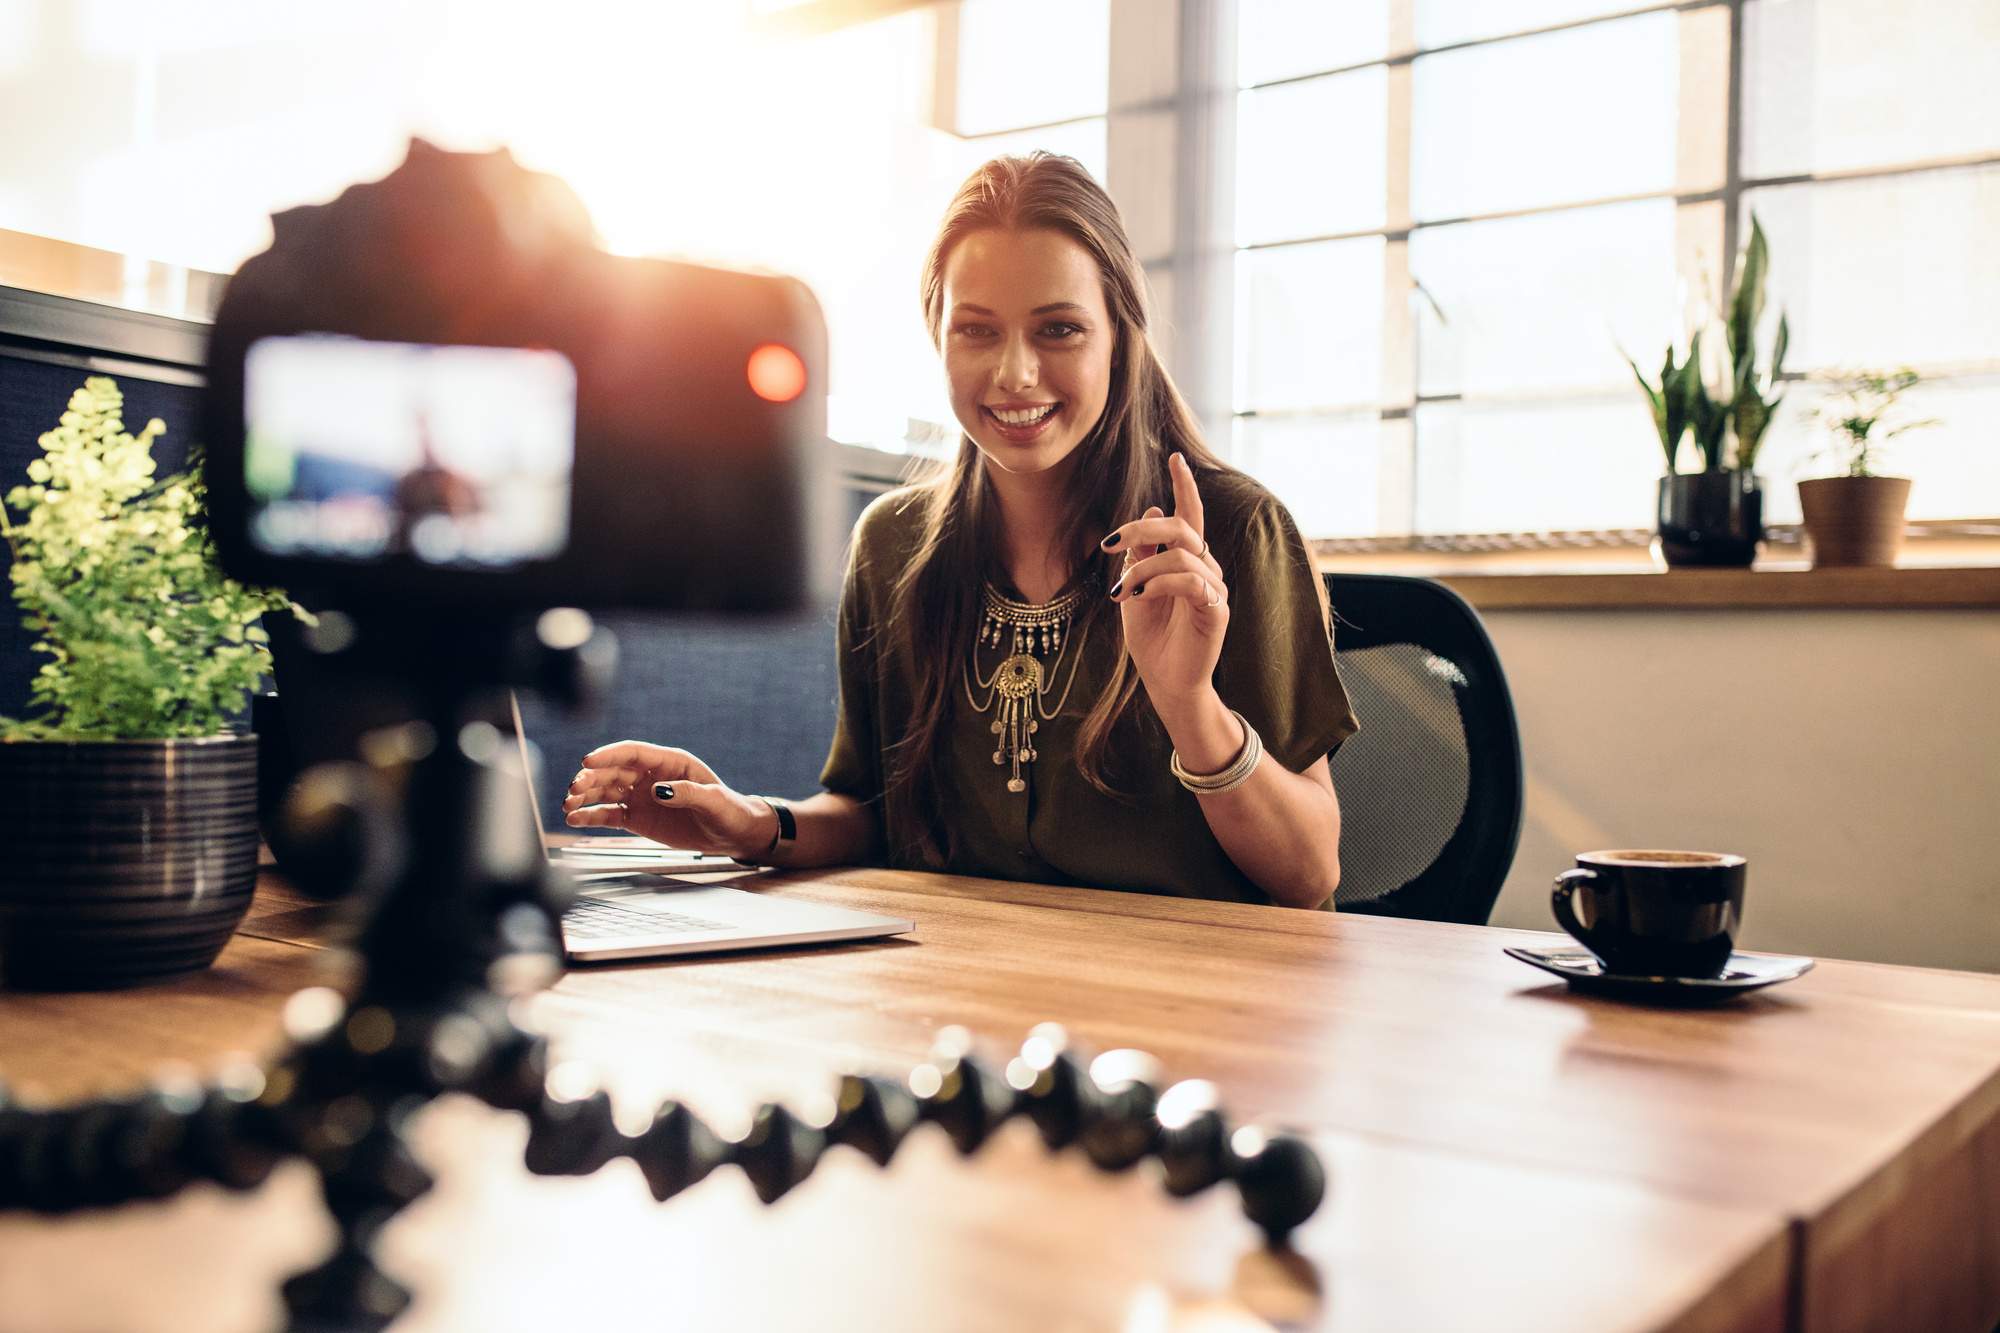 5 Things You Must Include in Your Video Marketing Strategy